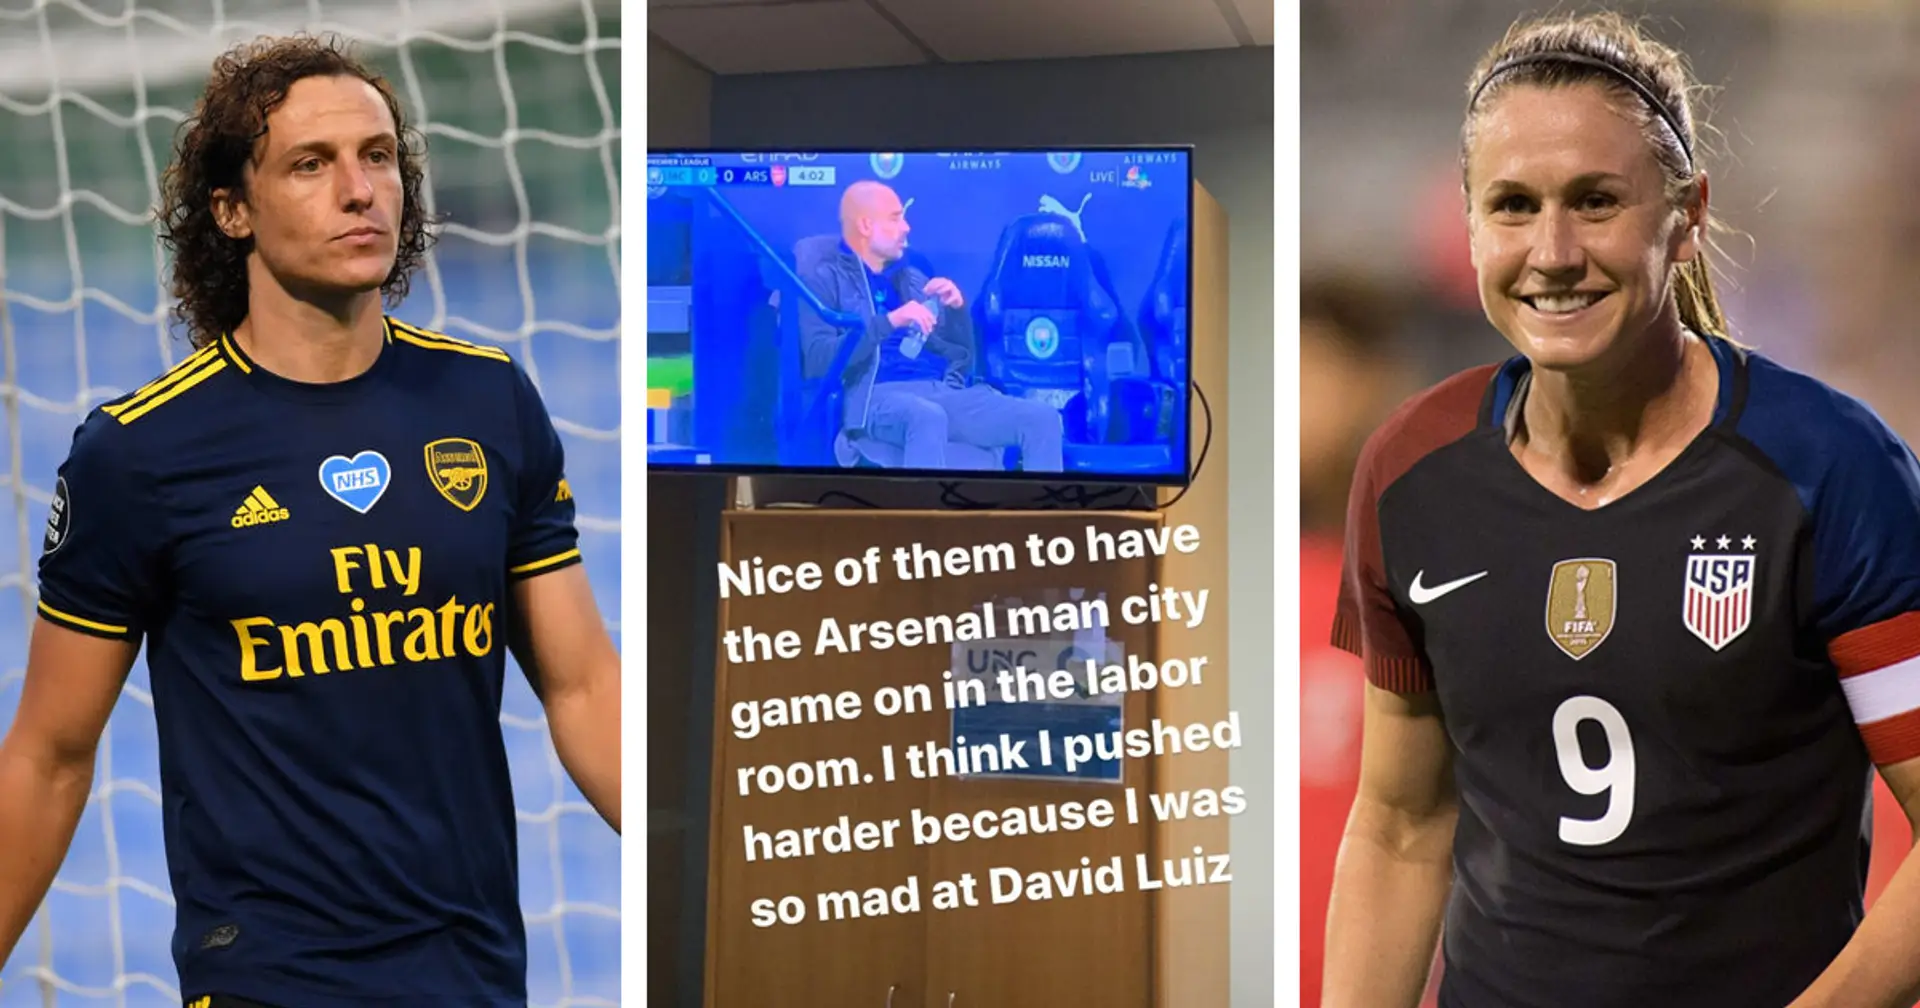 Former Arsenal Women player Heather O'Reilly hilariously reacts to Luiz's shitshow vs Man City